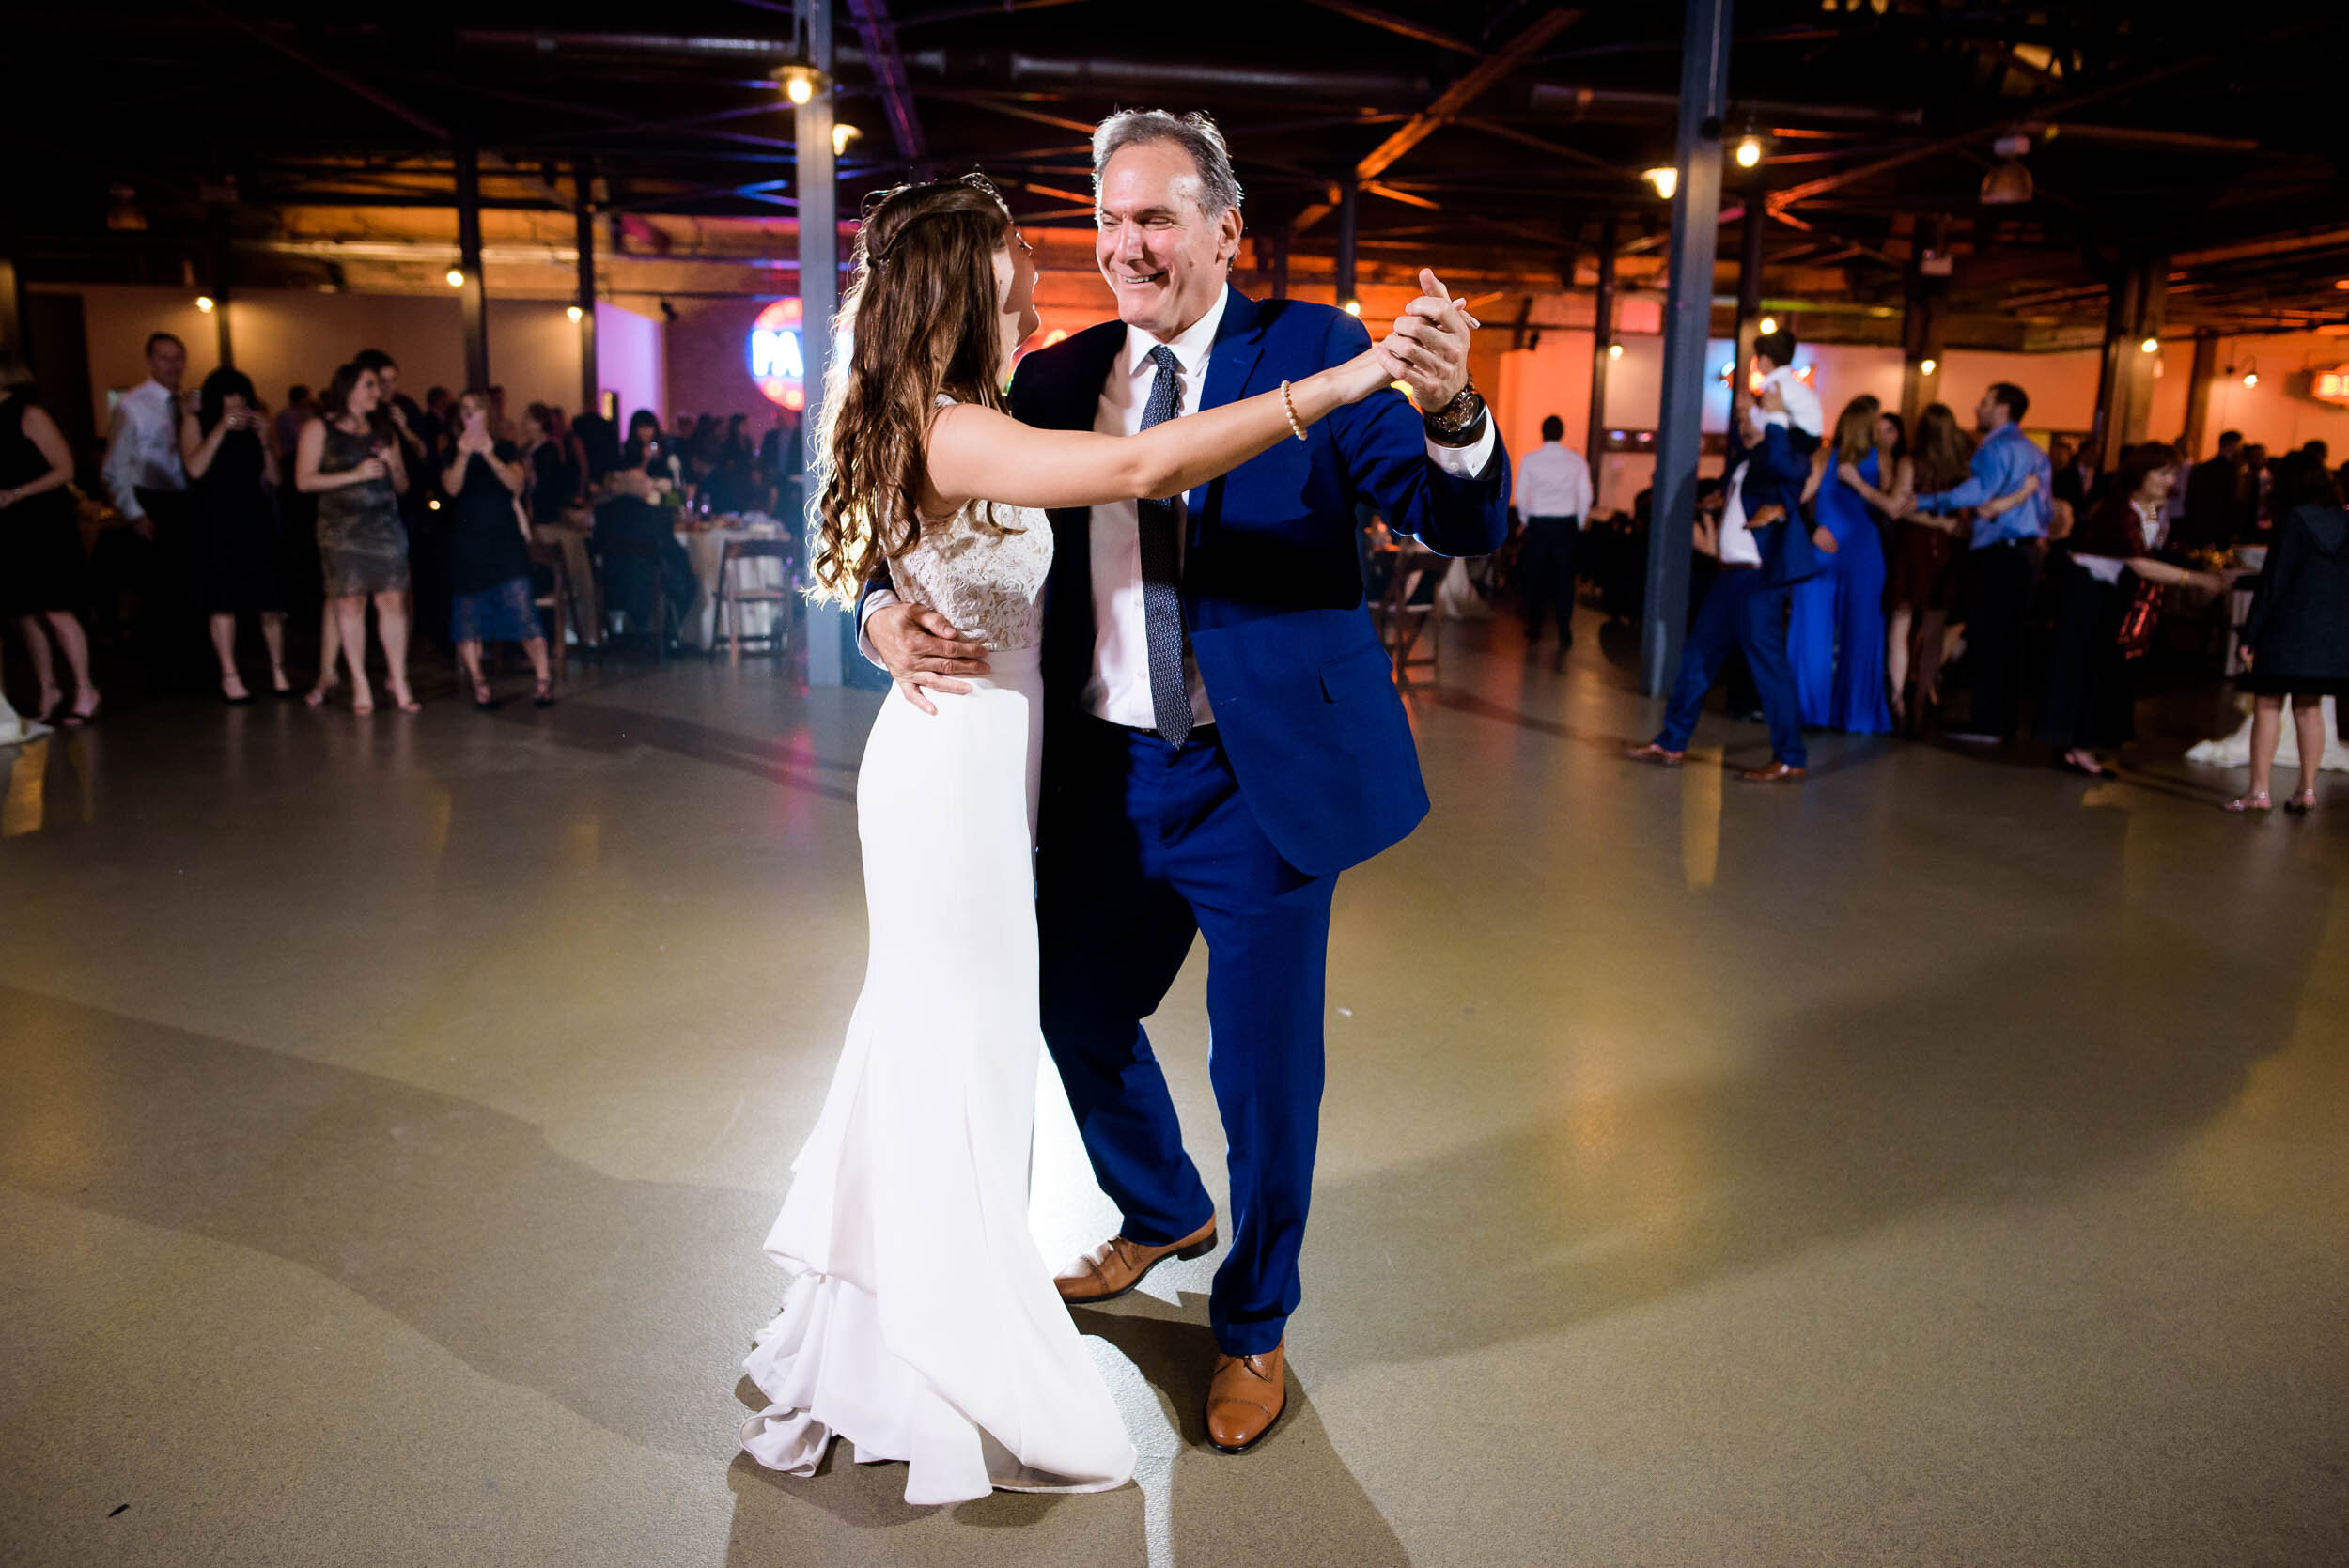 Bride dances with her father during the reception: Ravenswood Event Center Chicago wedding captured by J. Brown Photography.  